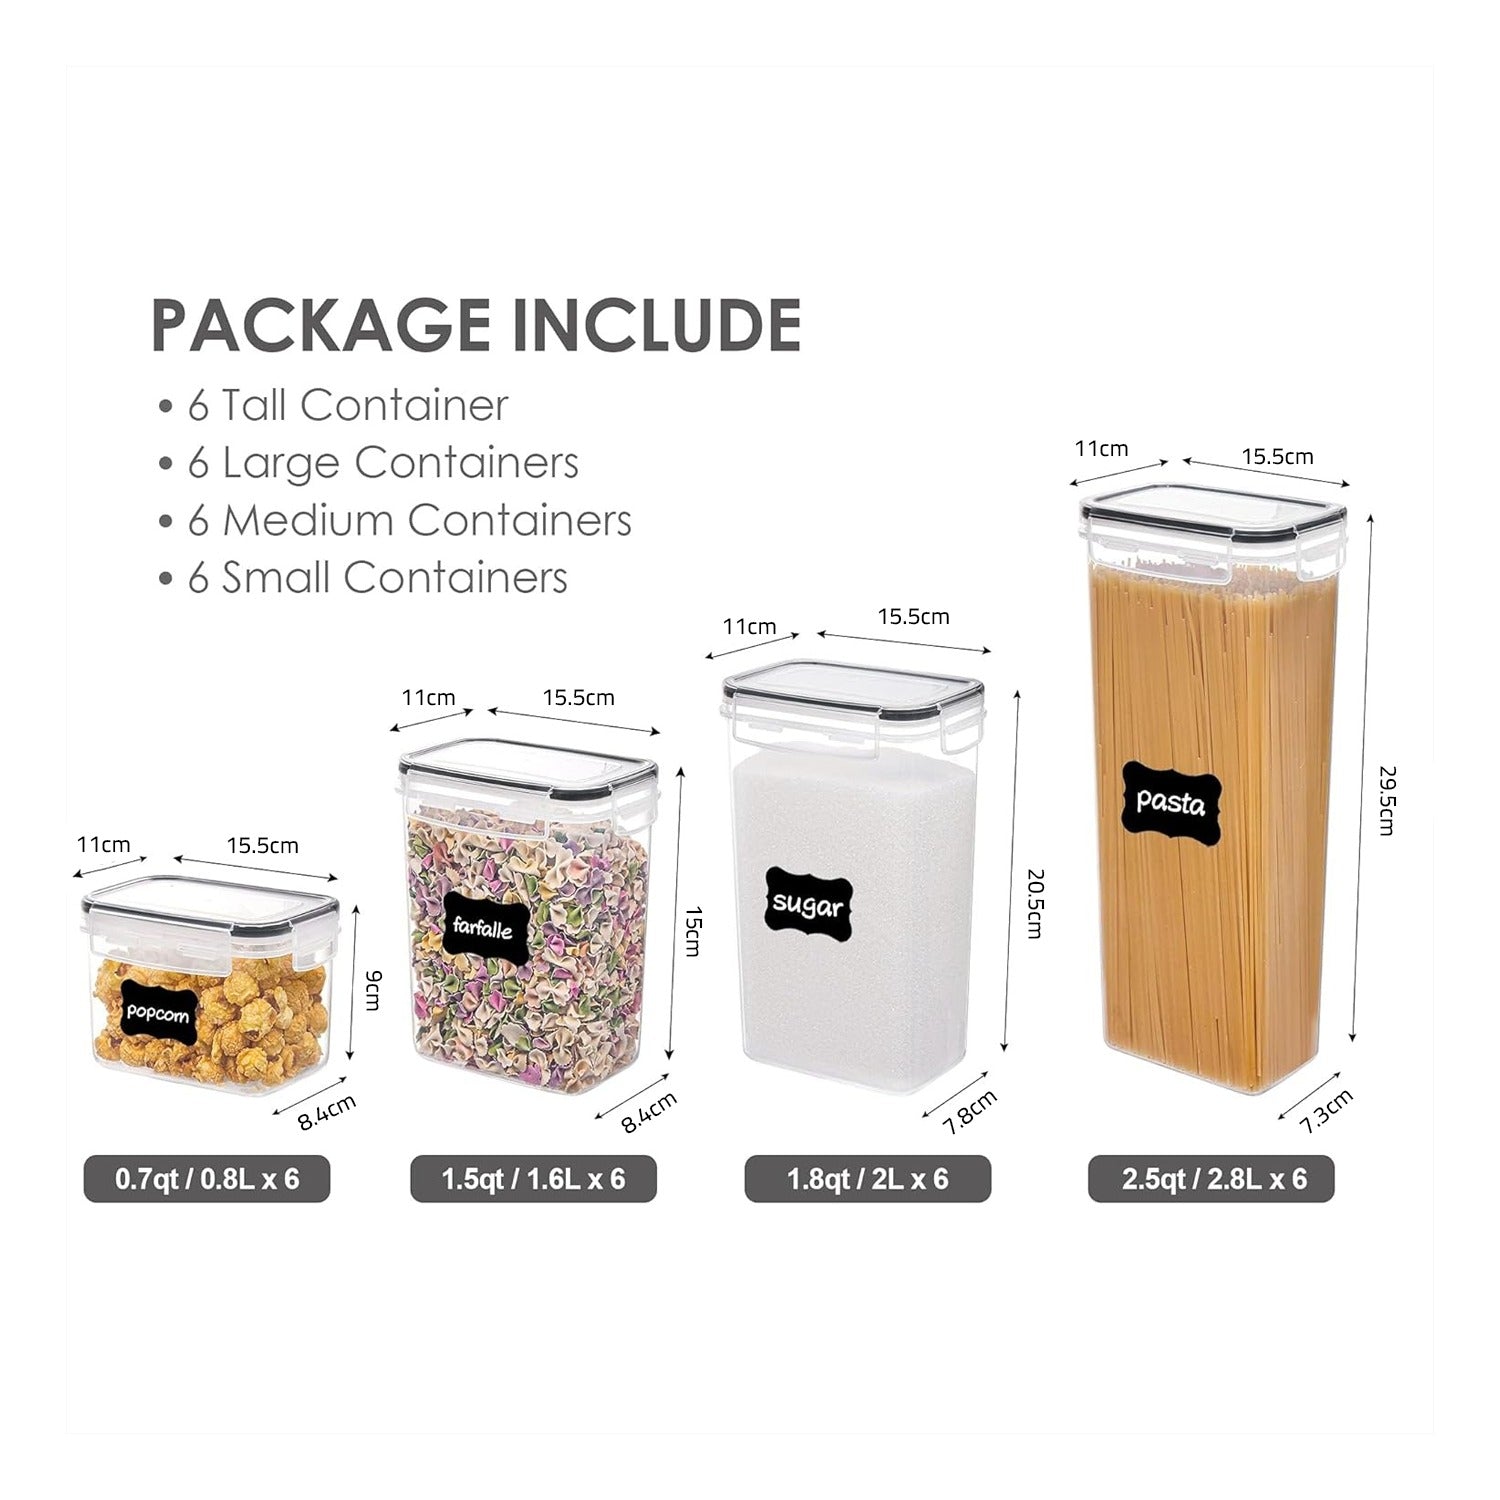 Airtight Food Storage Container package includes